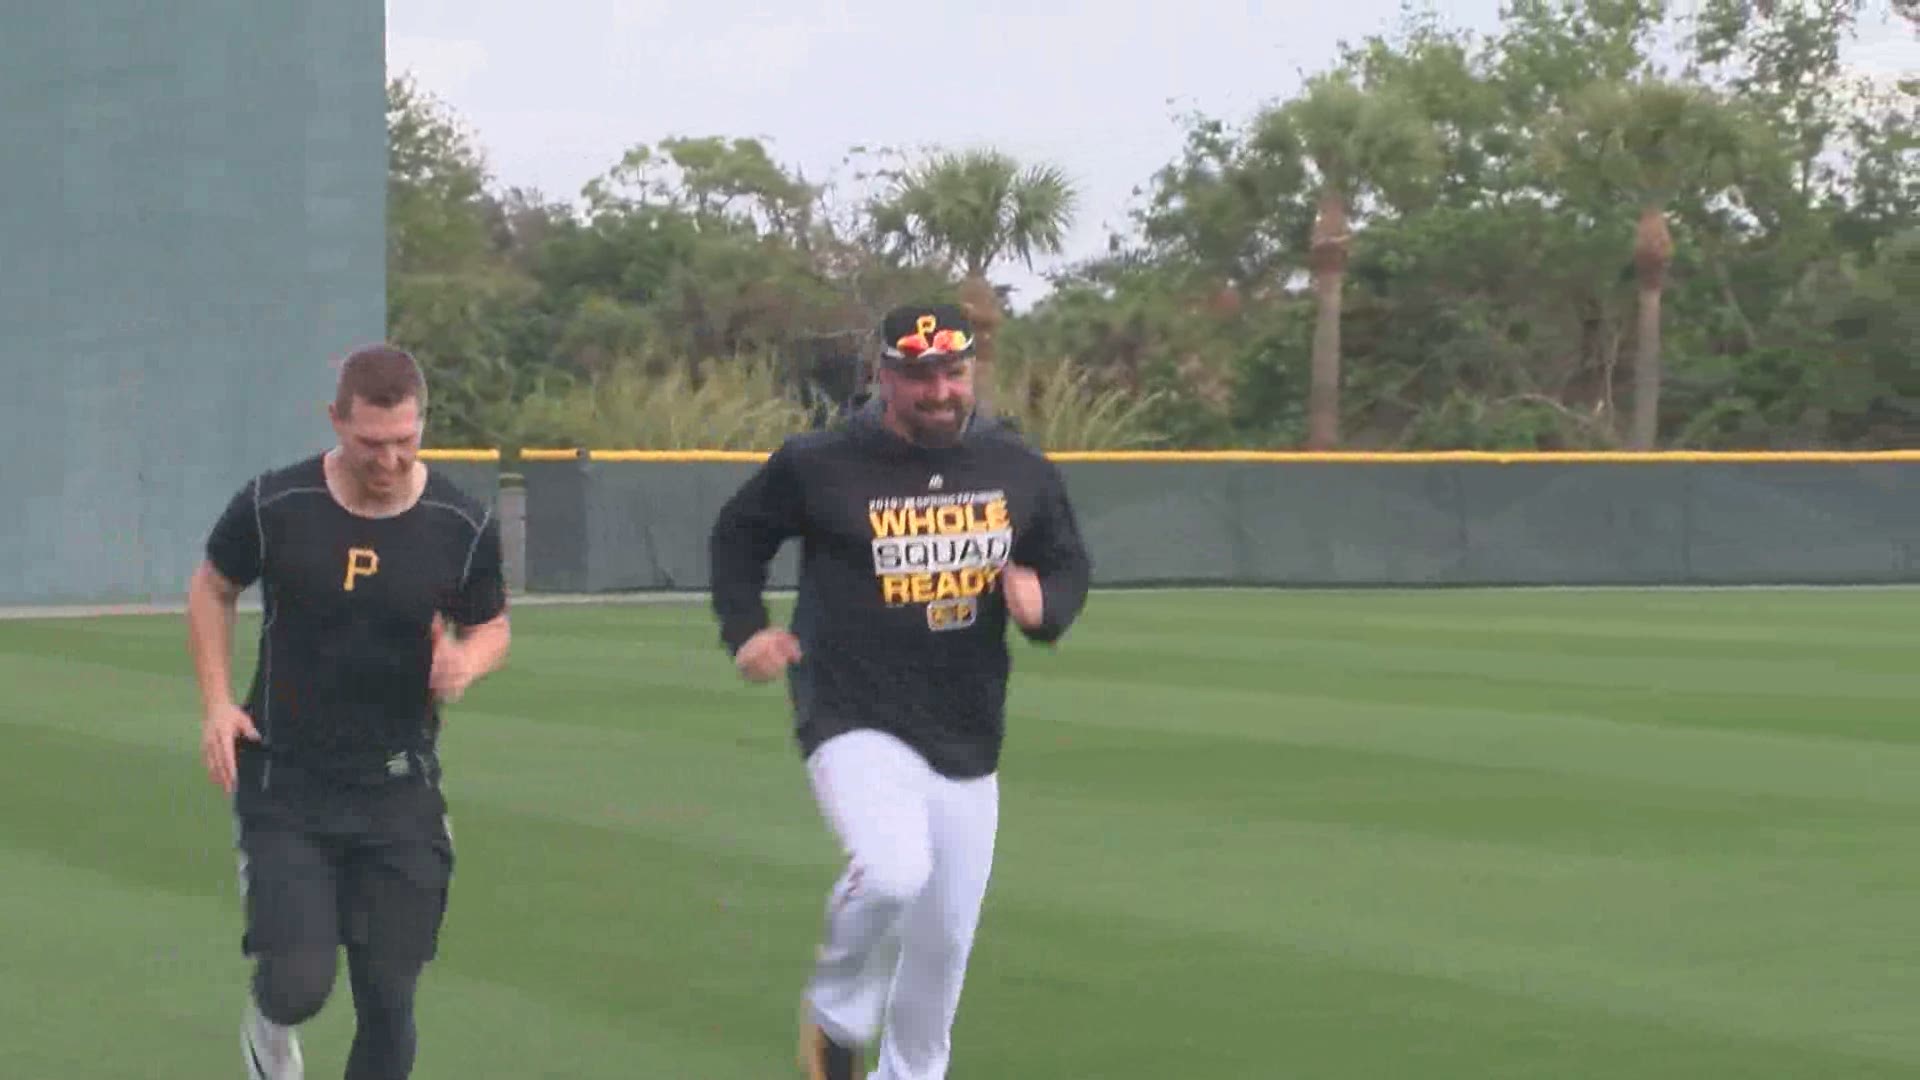 Country music legend Garth Brooks is working out with the Pittsburgh Pirates as part of his charity for kids.